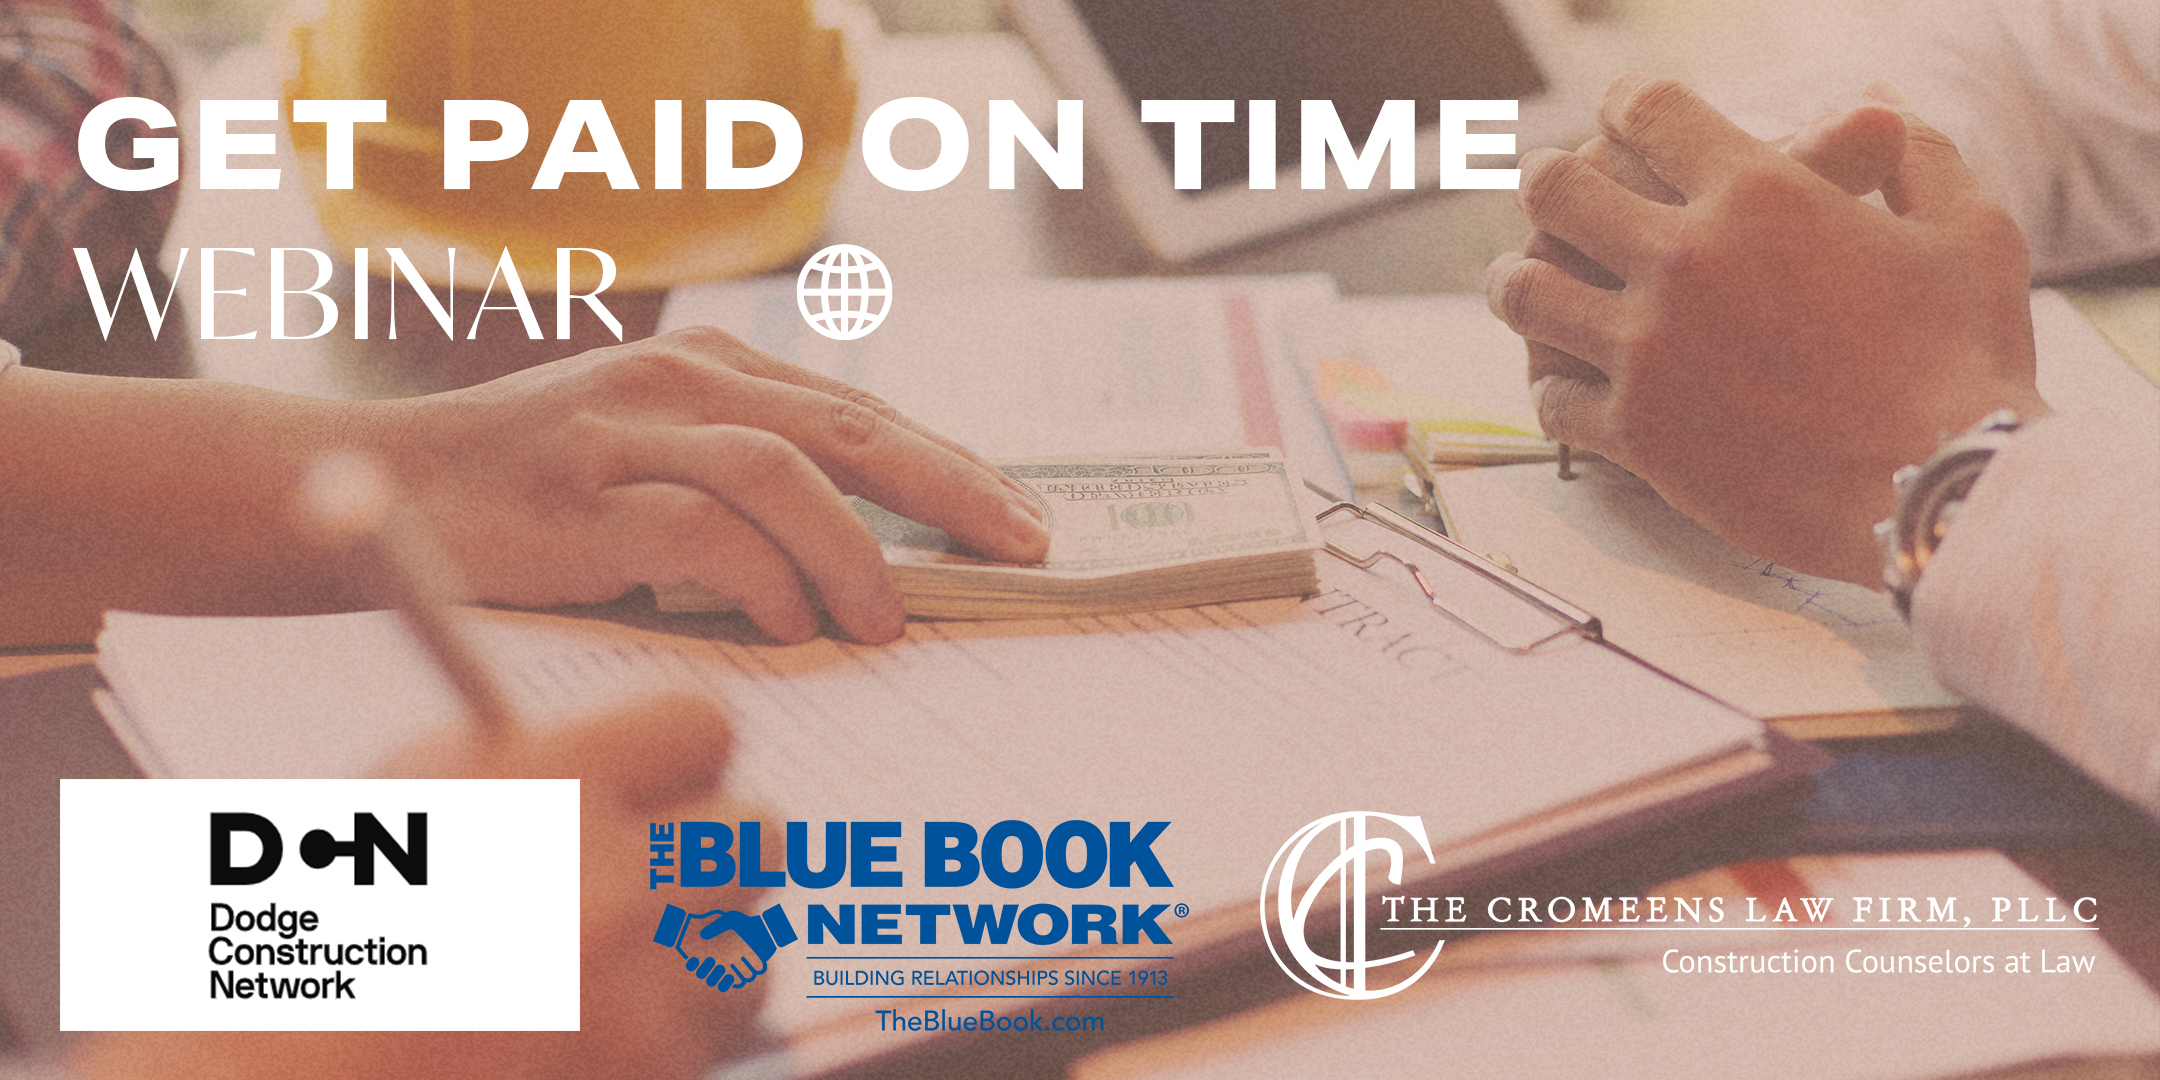 Get Paid On Time Webinar with The Blue Book Network. May 18th